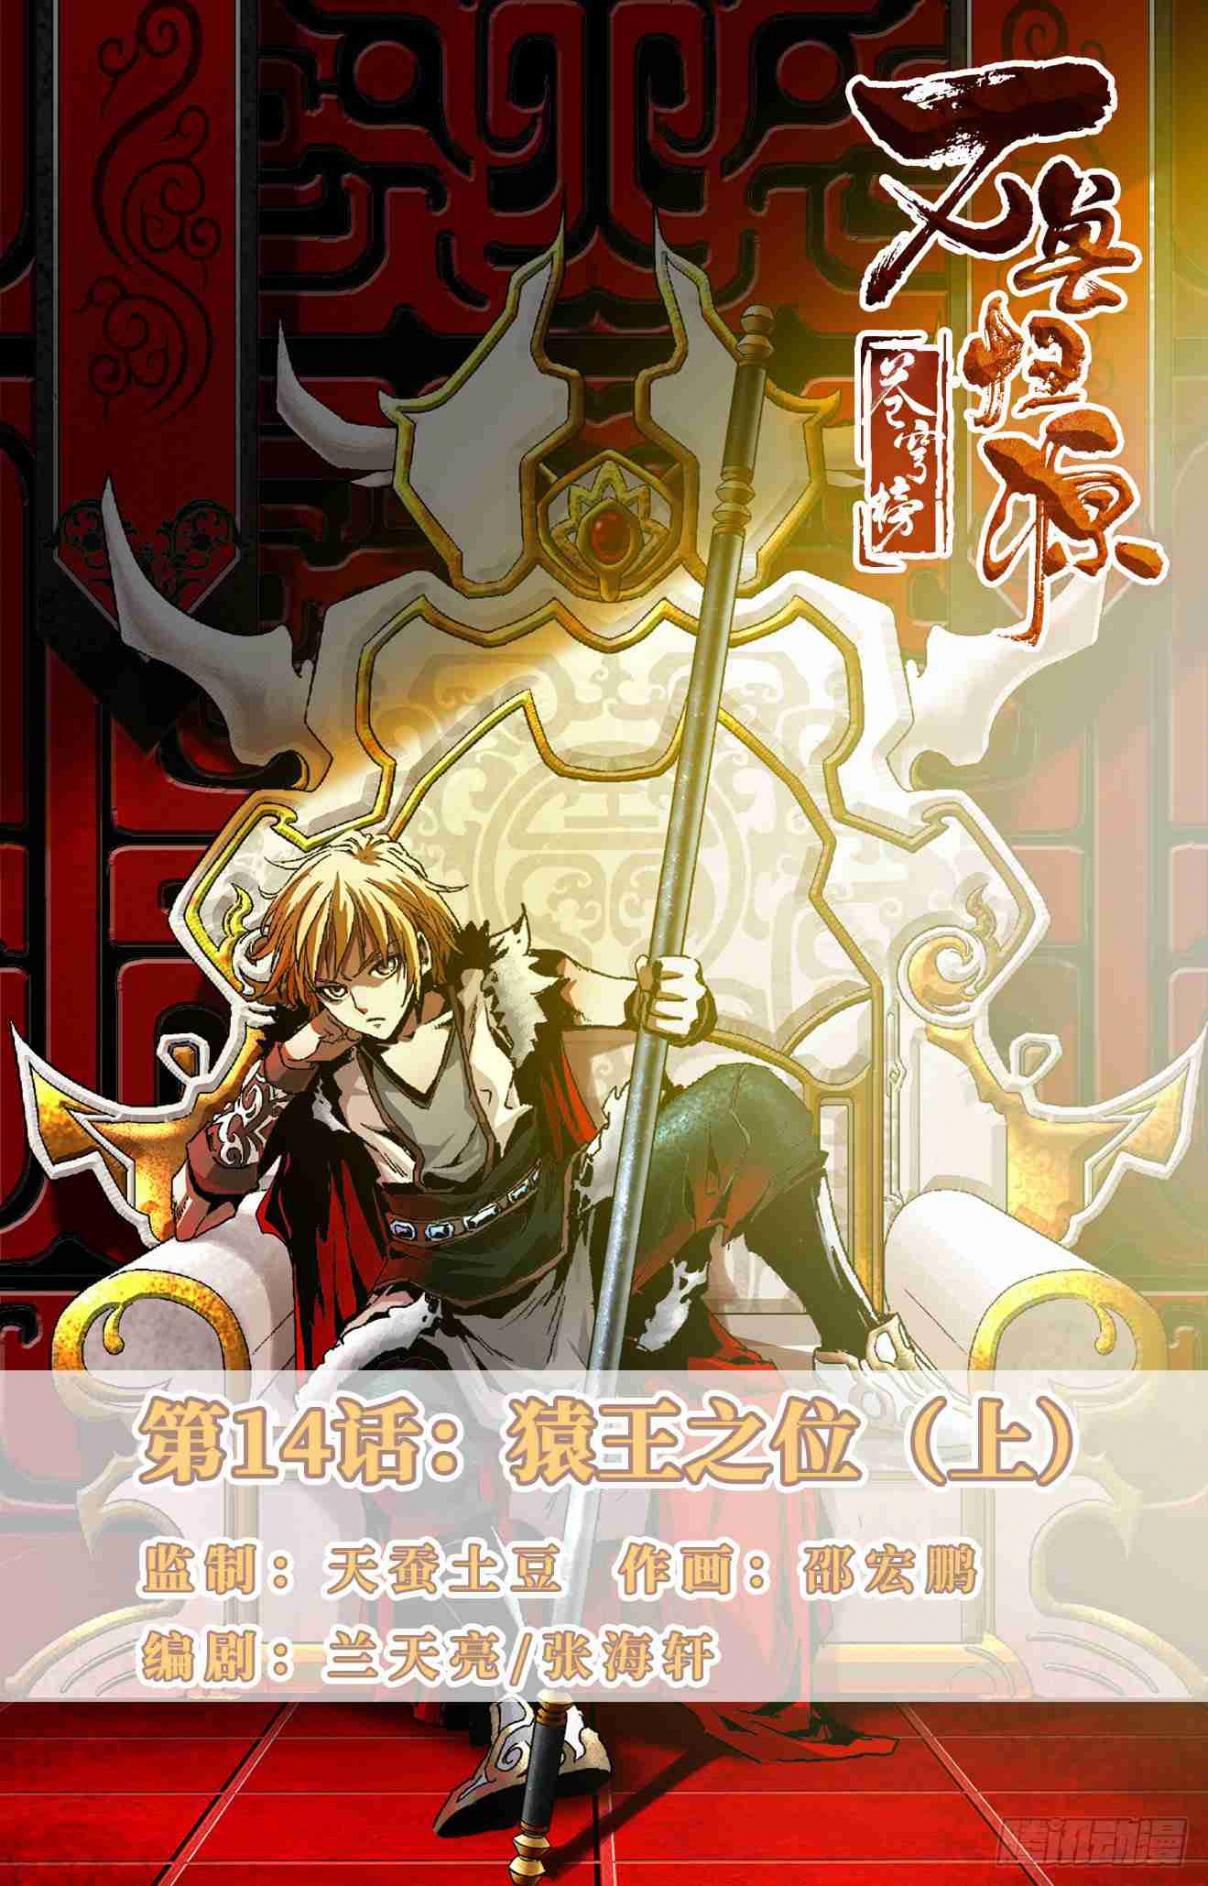 Fights Break Sphere – Return of The Beasts Ch. 14.1 Throne of the Ape King